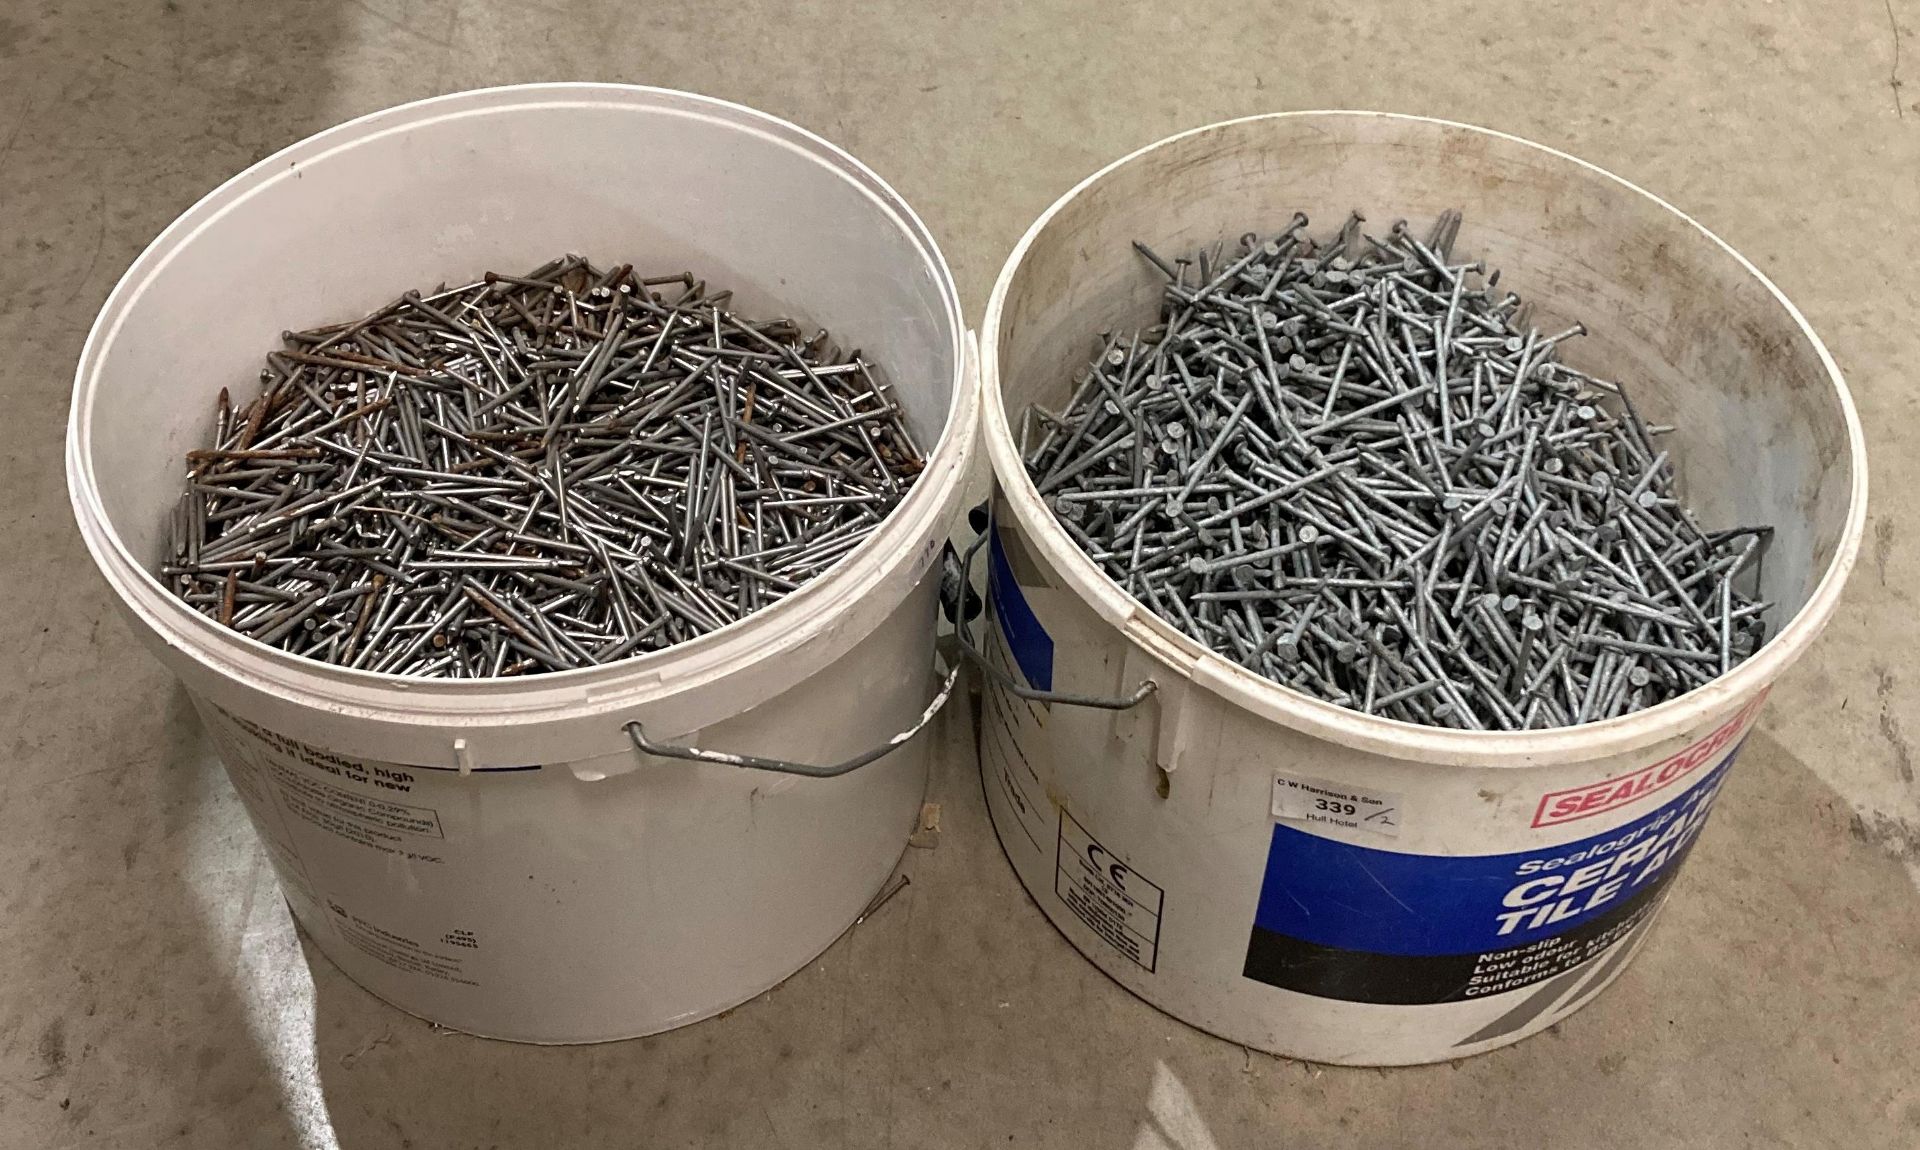 Contents to 2 x tubs - large quantity of galvanized nails (saleroom location: S01-1)